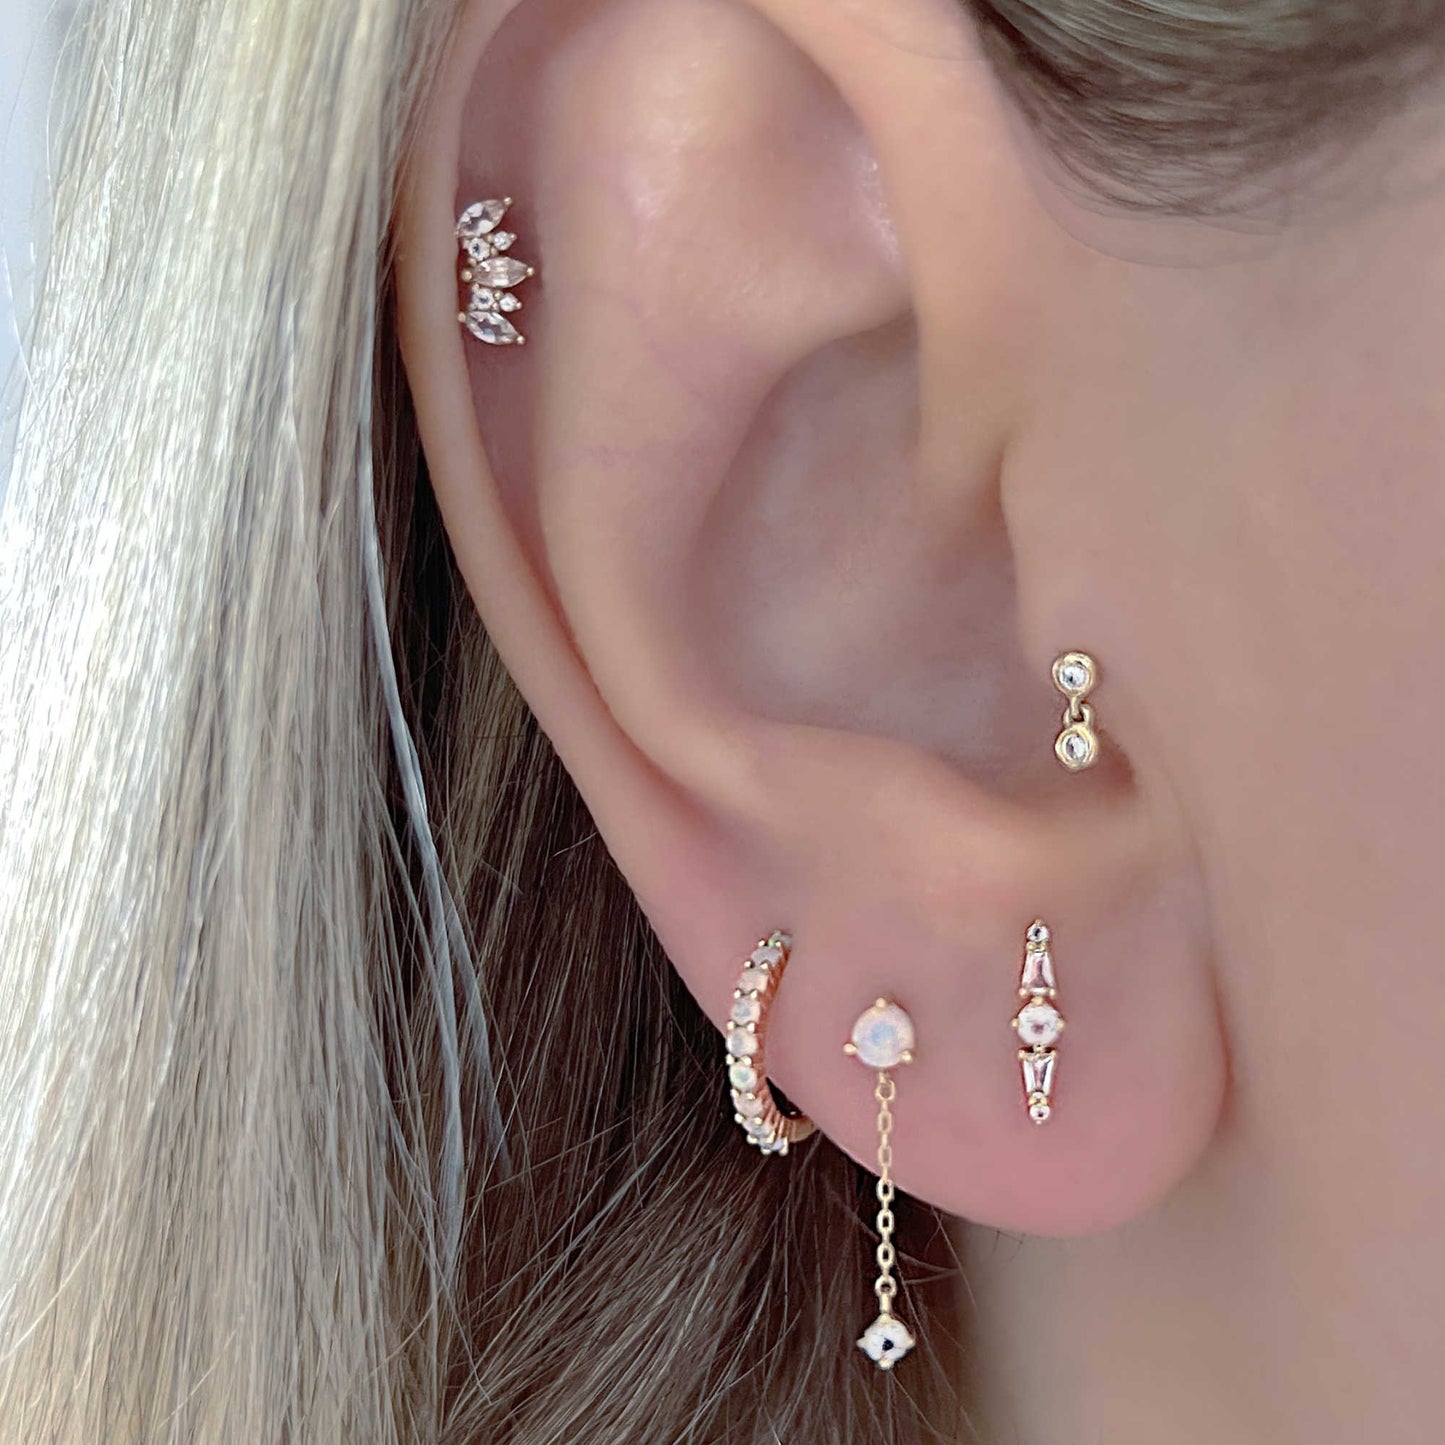 Gemstone Spike Earring | 14K Gold Flat Back Cartilage Piercing Studs from Two of Most